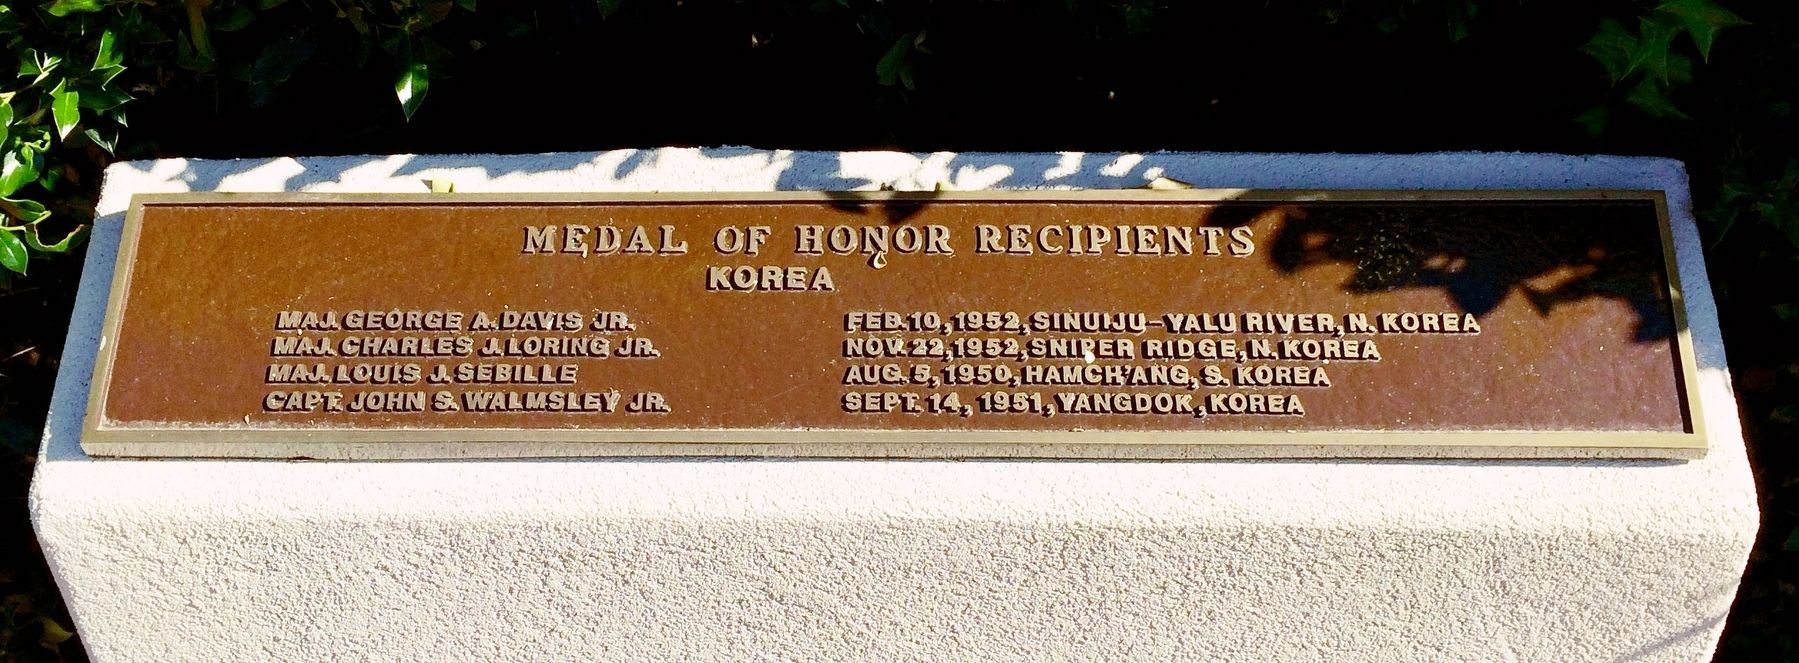 Medal of Honor Recipients - Korea Marker image. Click for full size.